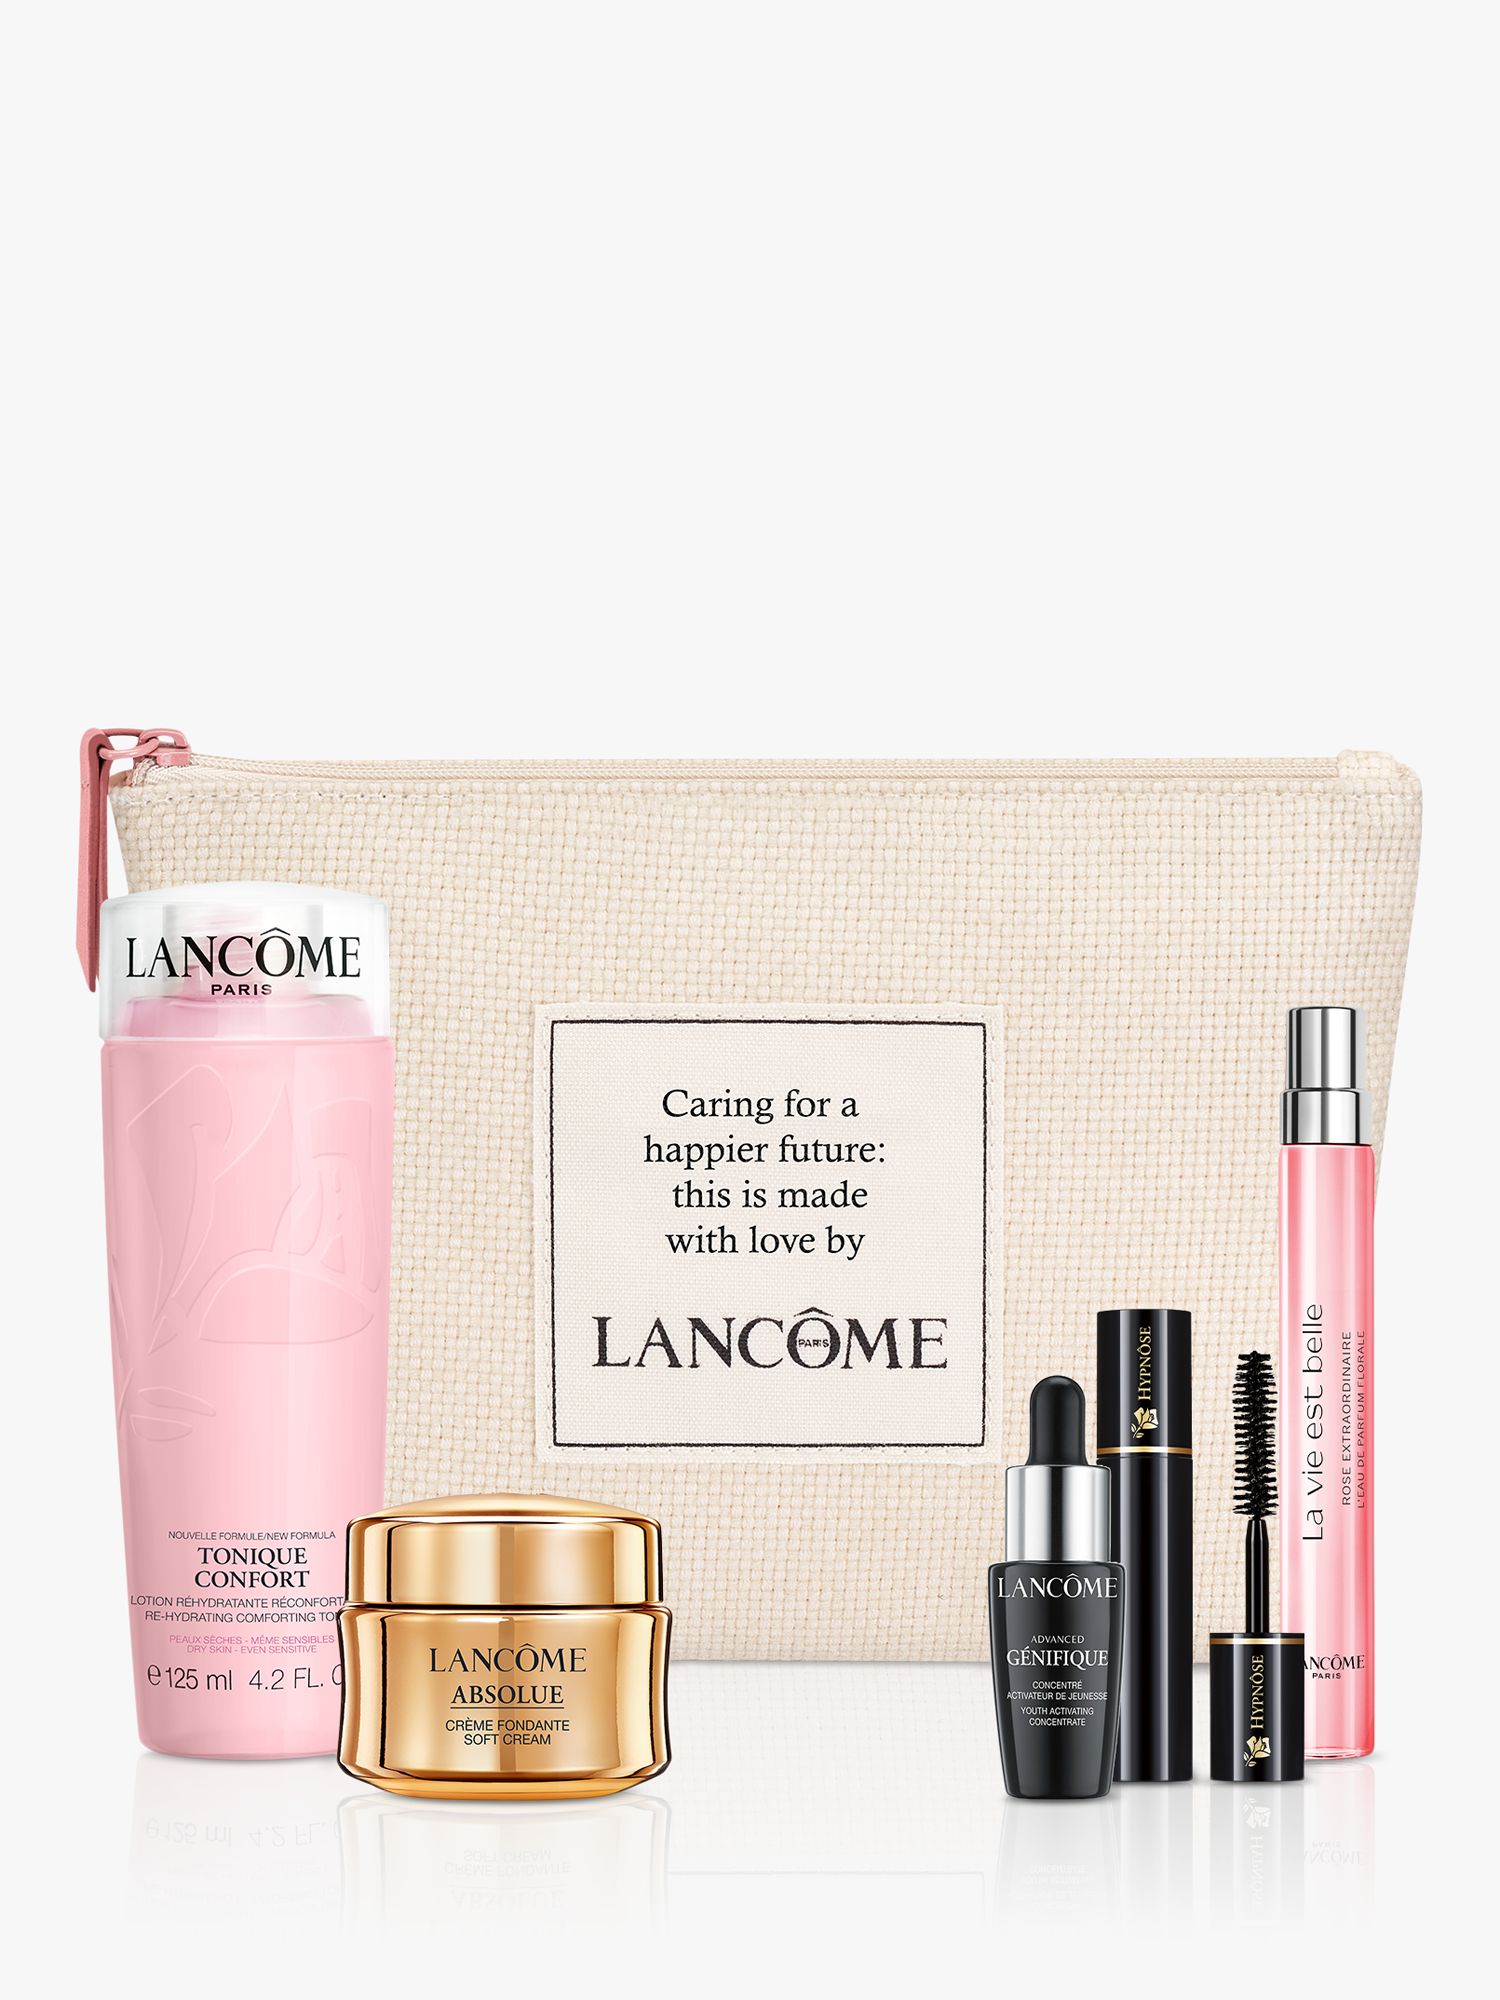 Lancome offers